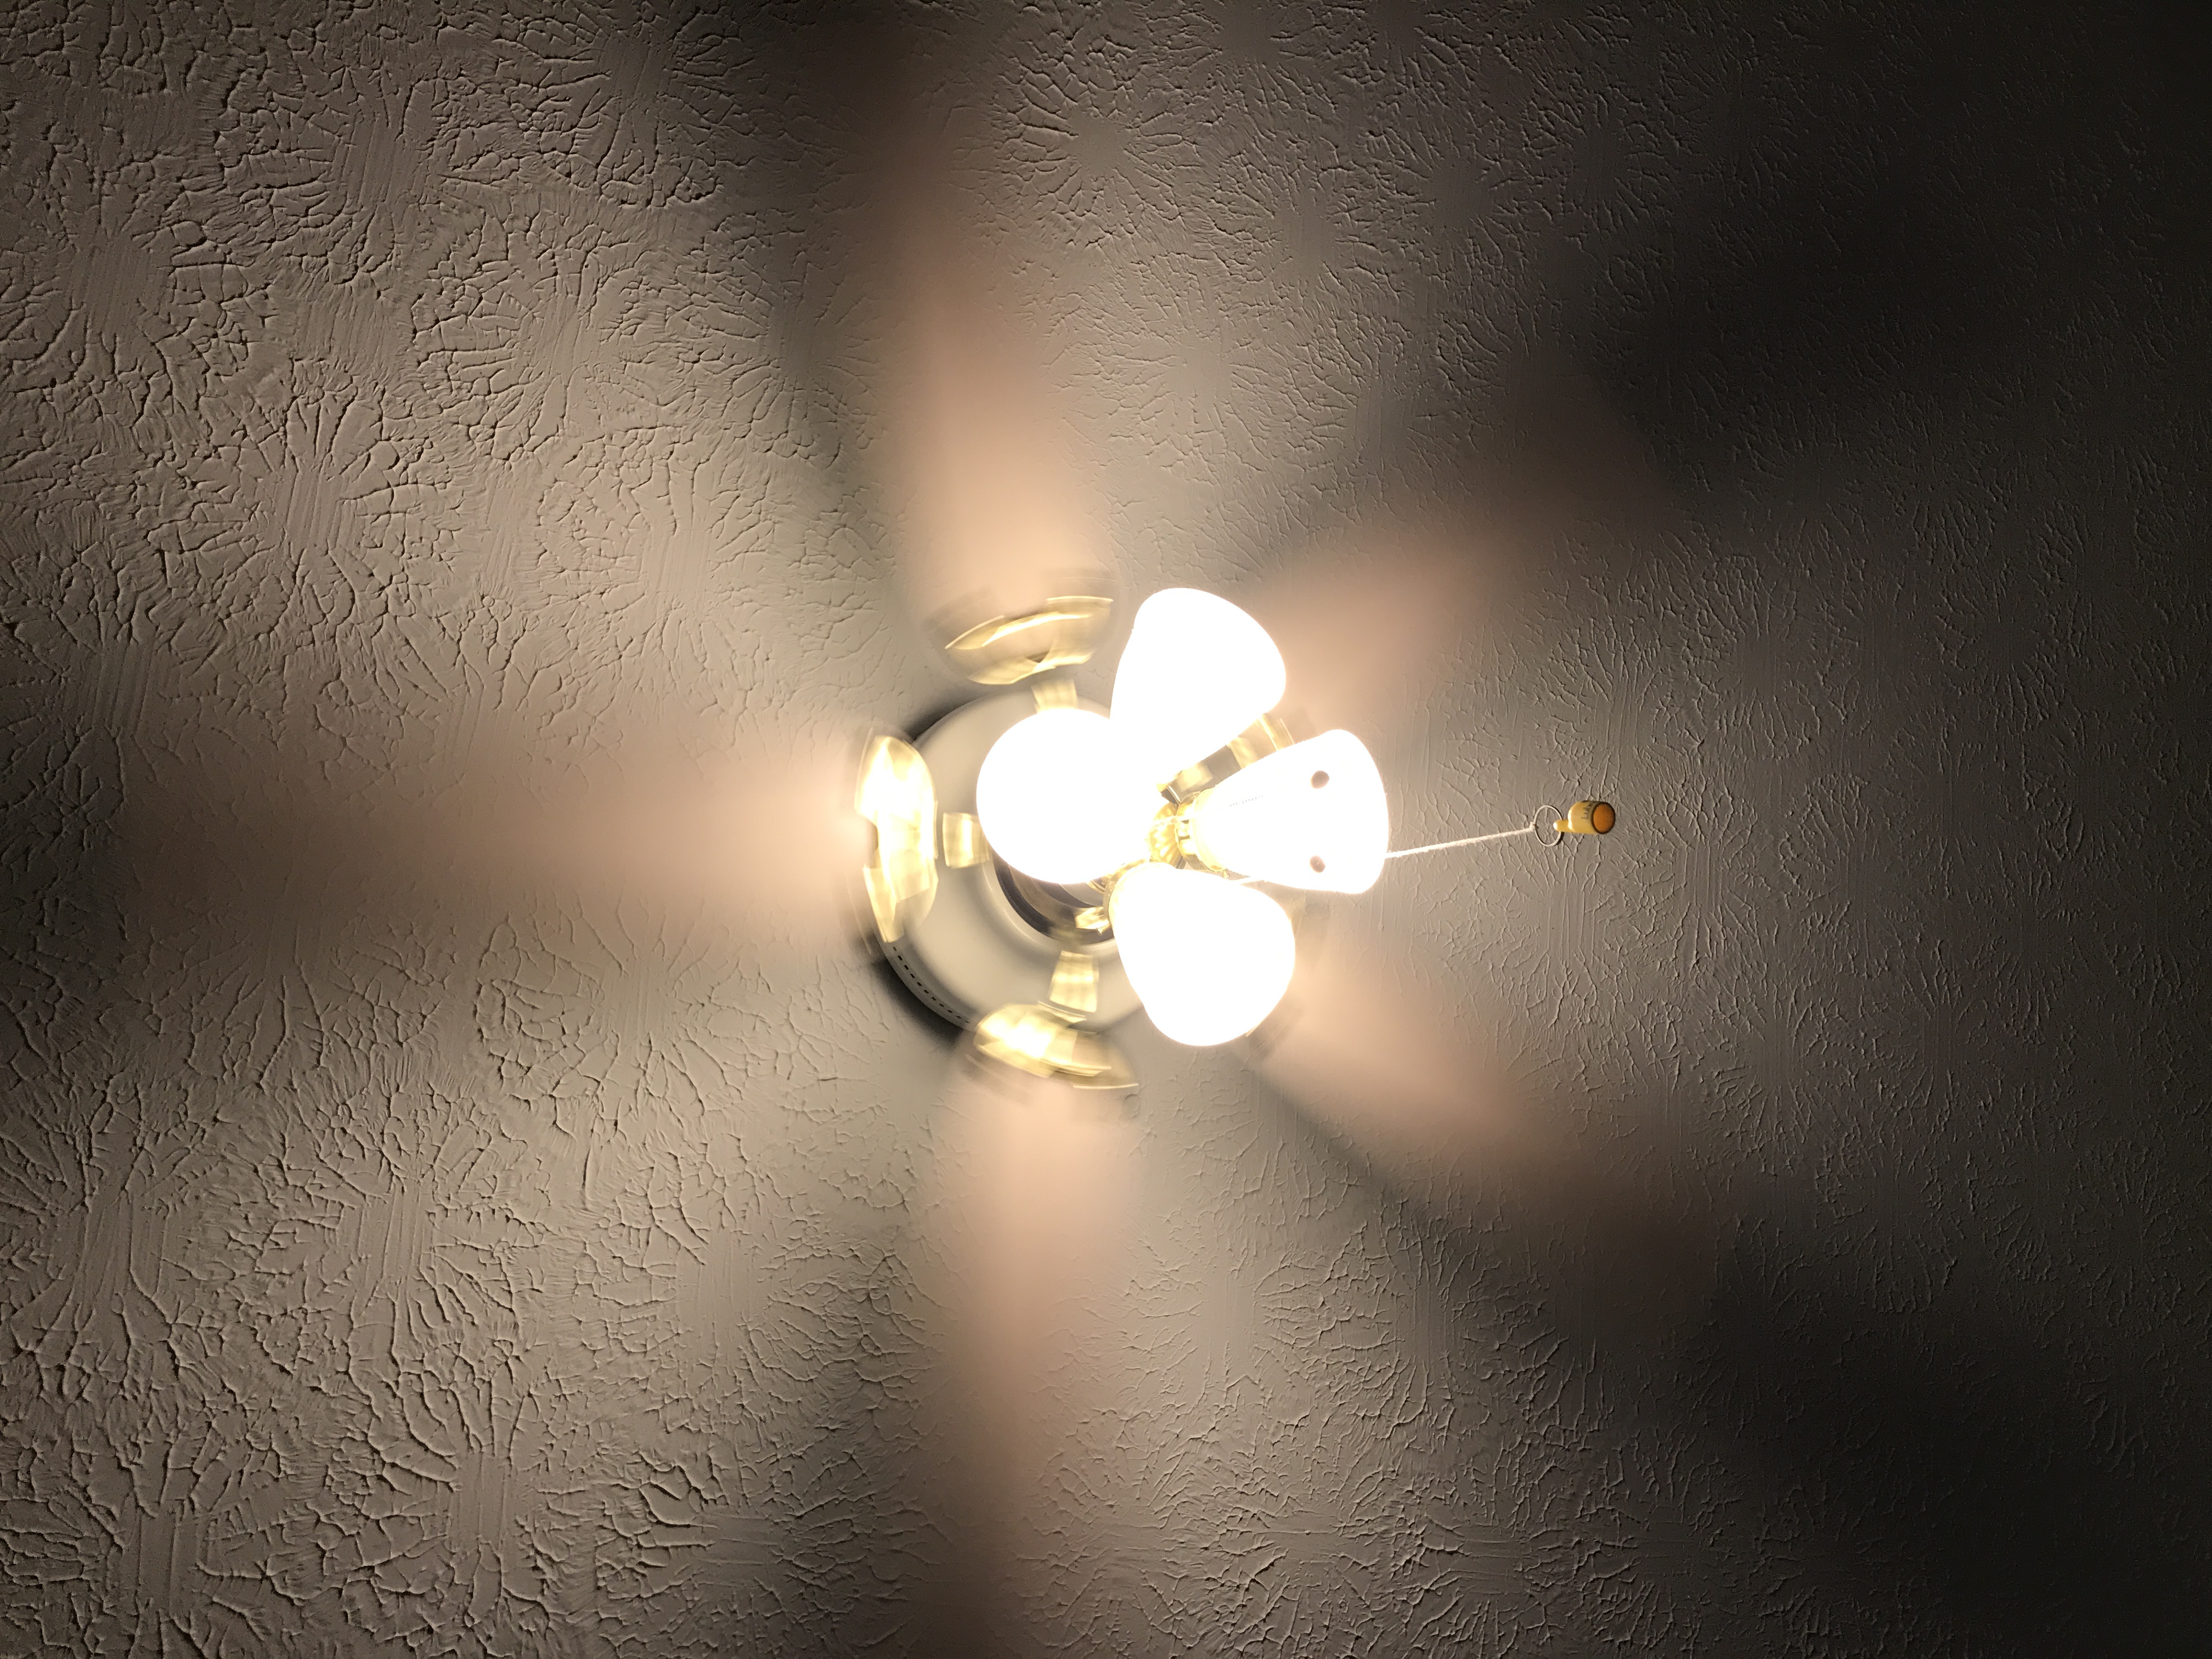 2 Photos of a ceiling fan, one with light on and one with light off.